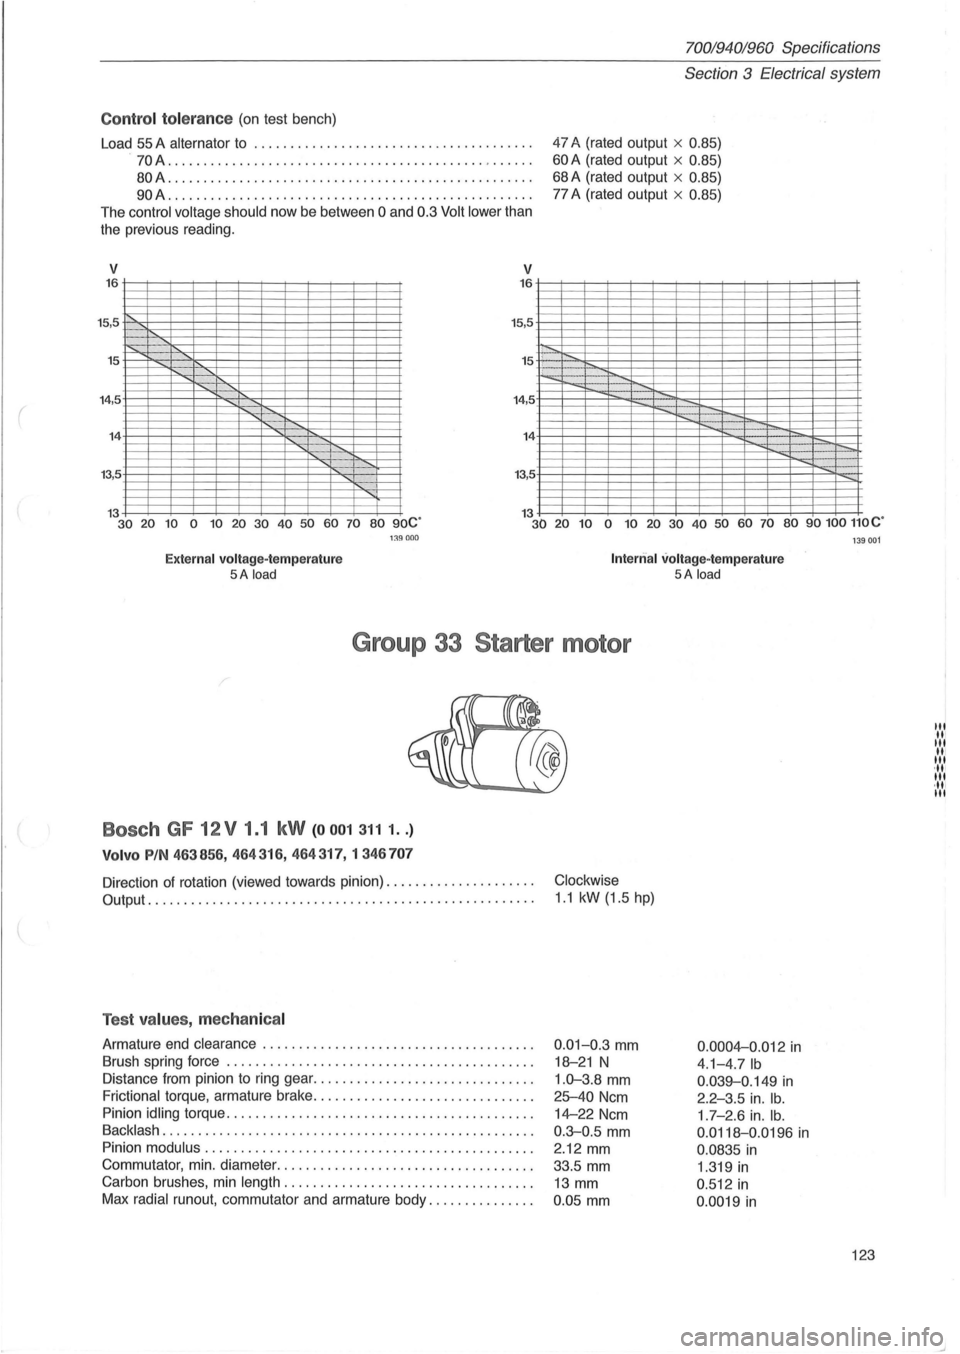 VOLVO 940 1982  Service Repair Manual ( 
Control to le ra nce (on  test  bench) 
Load 
55 A alternator to  ............... ............. ....... ... . 
. 
70A ...................... ........................... . . 
80A .................. 